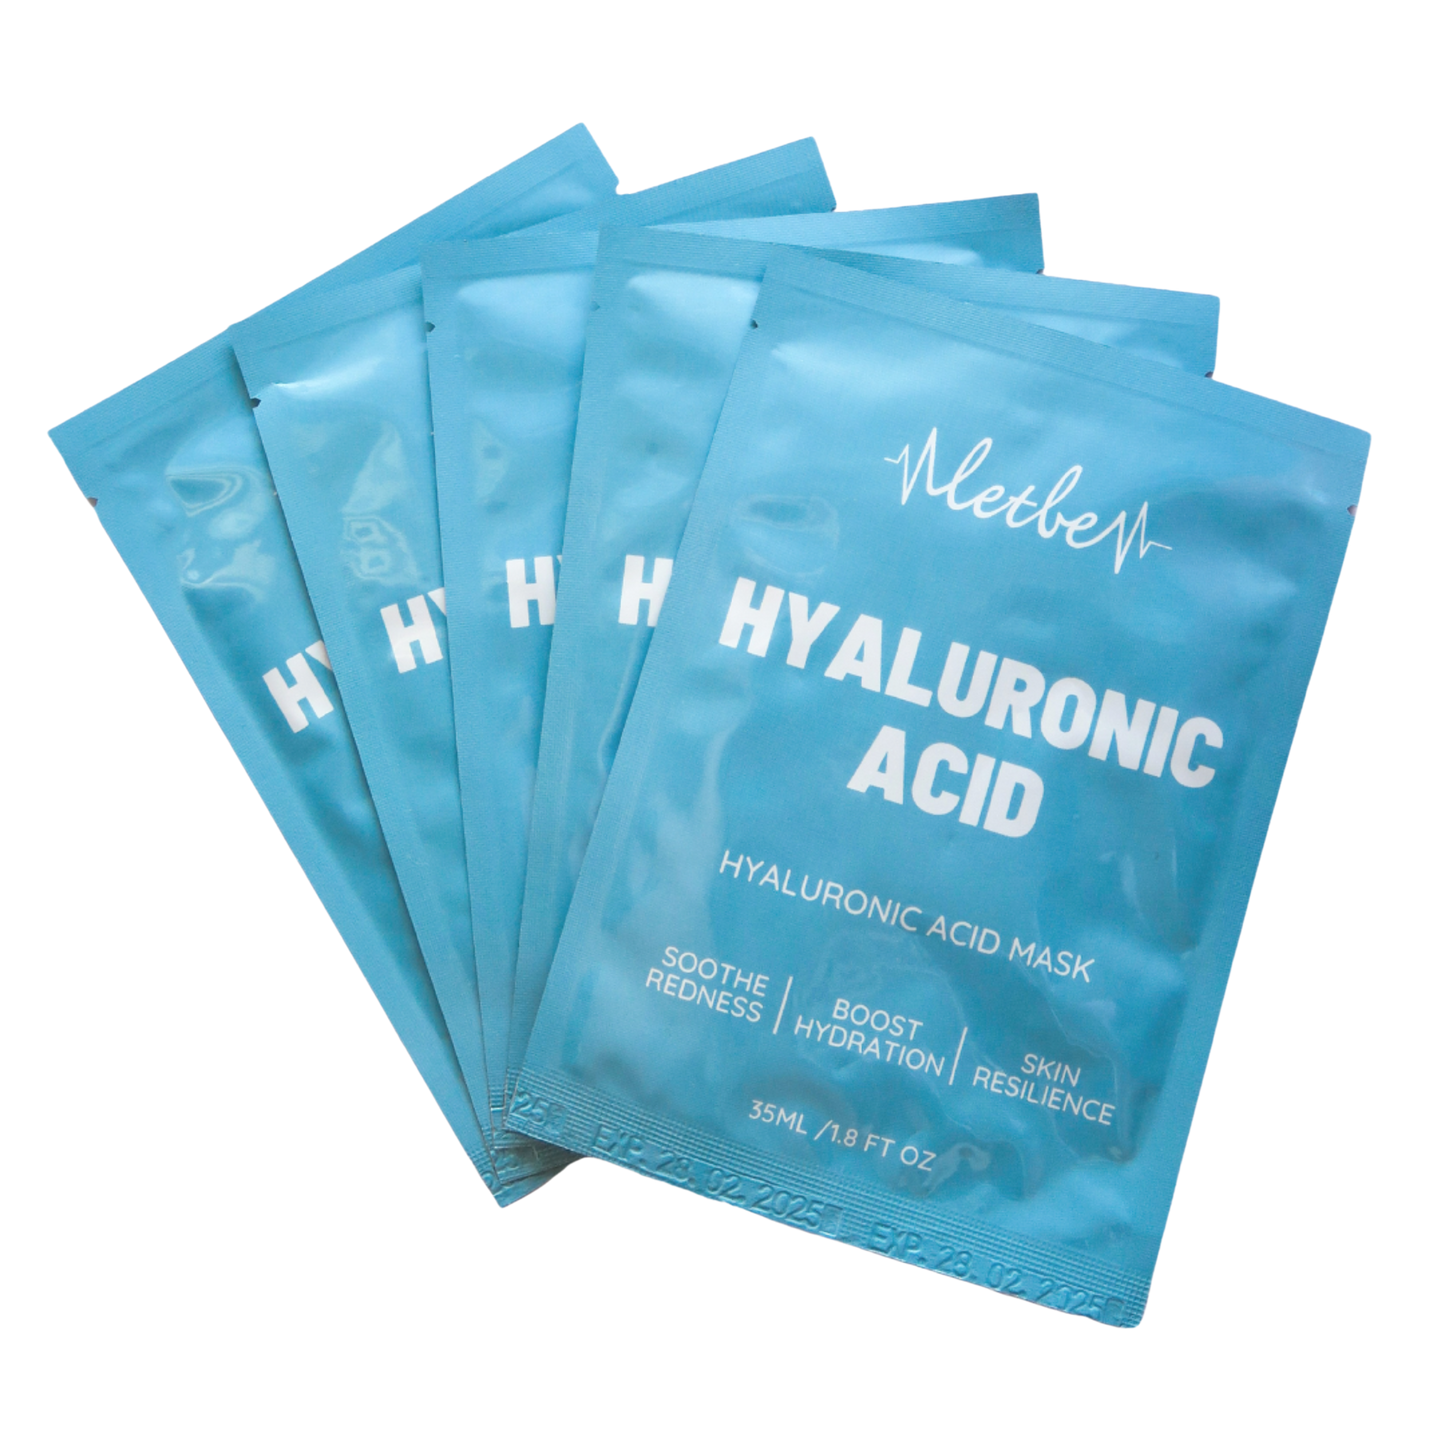 Hyaluronic Acid Silk Mask (6 pieces)